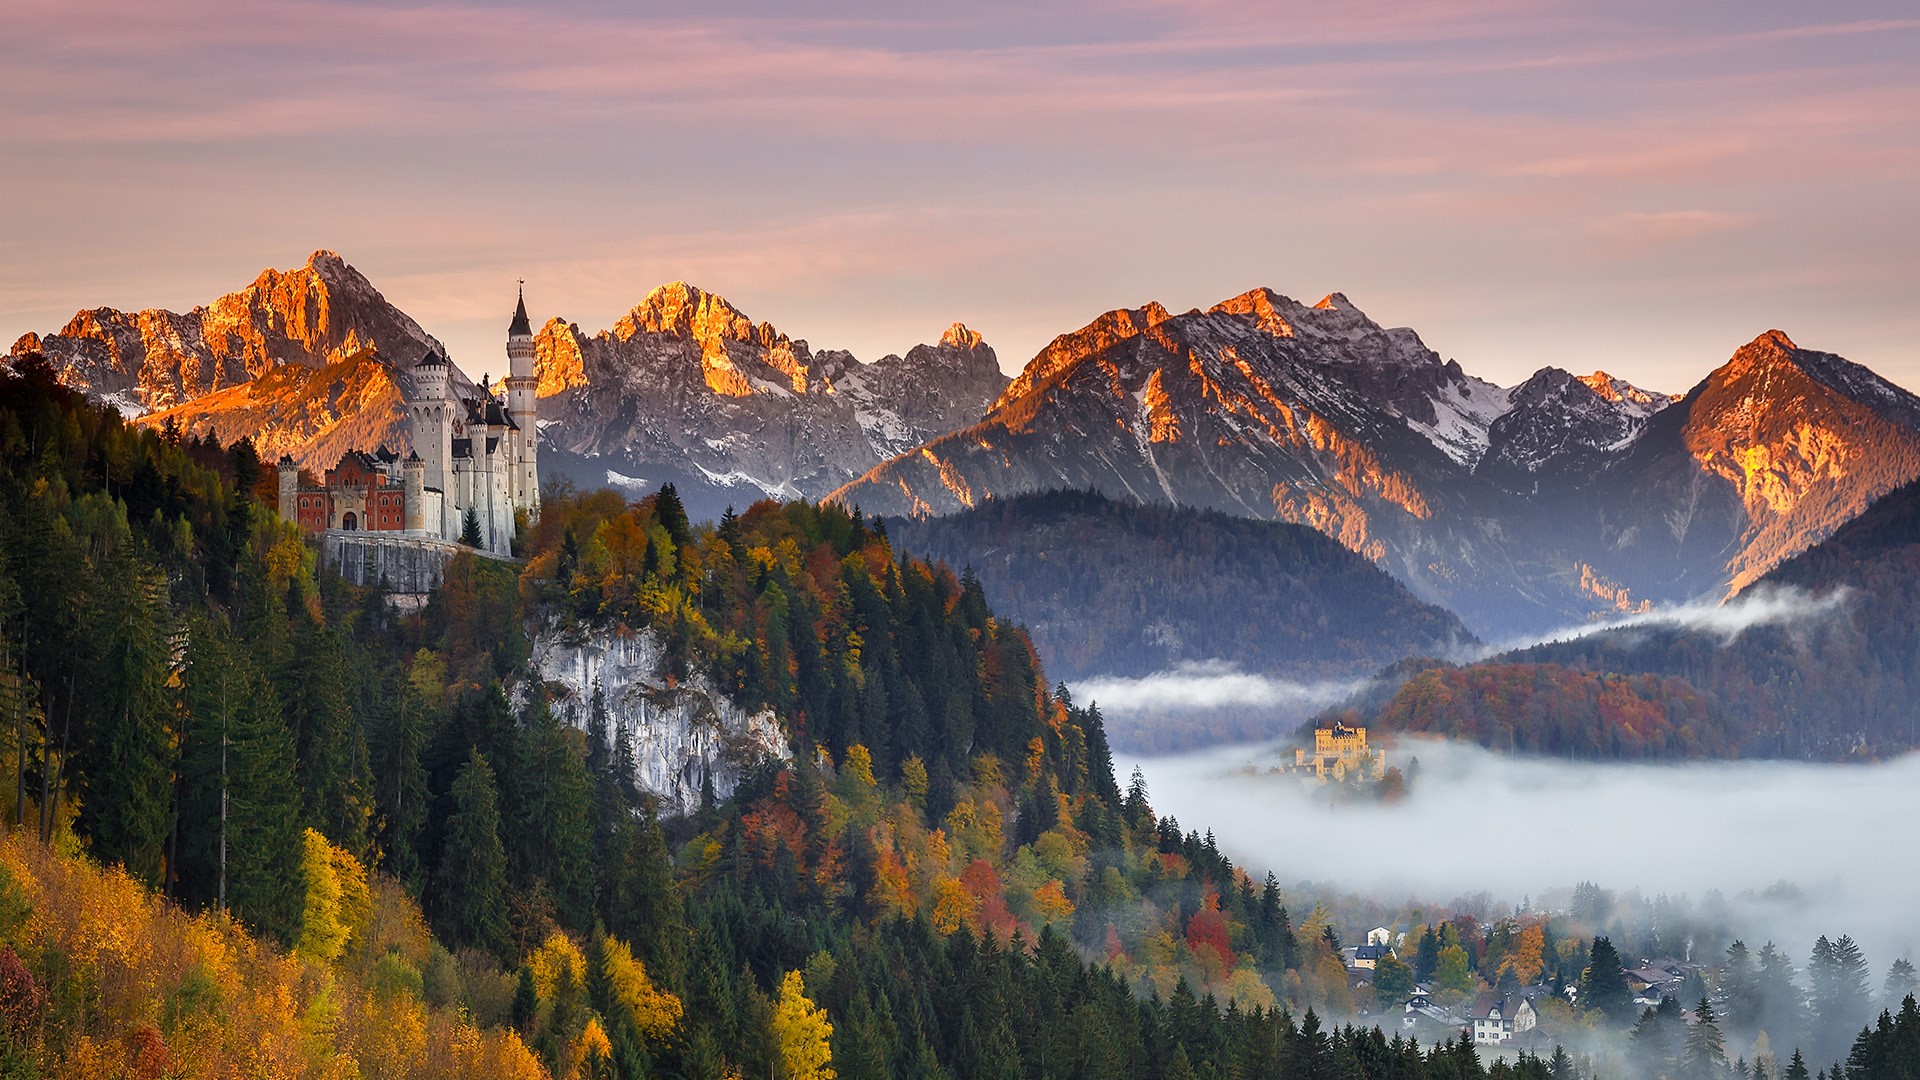 General 1920x1080 nature landscape trees forest castle mountains clouds town mist fall snowy mountain Neuschwanstein Castle Germany